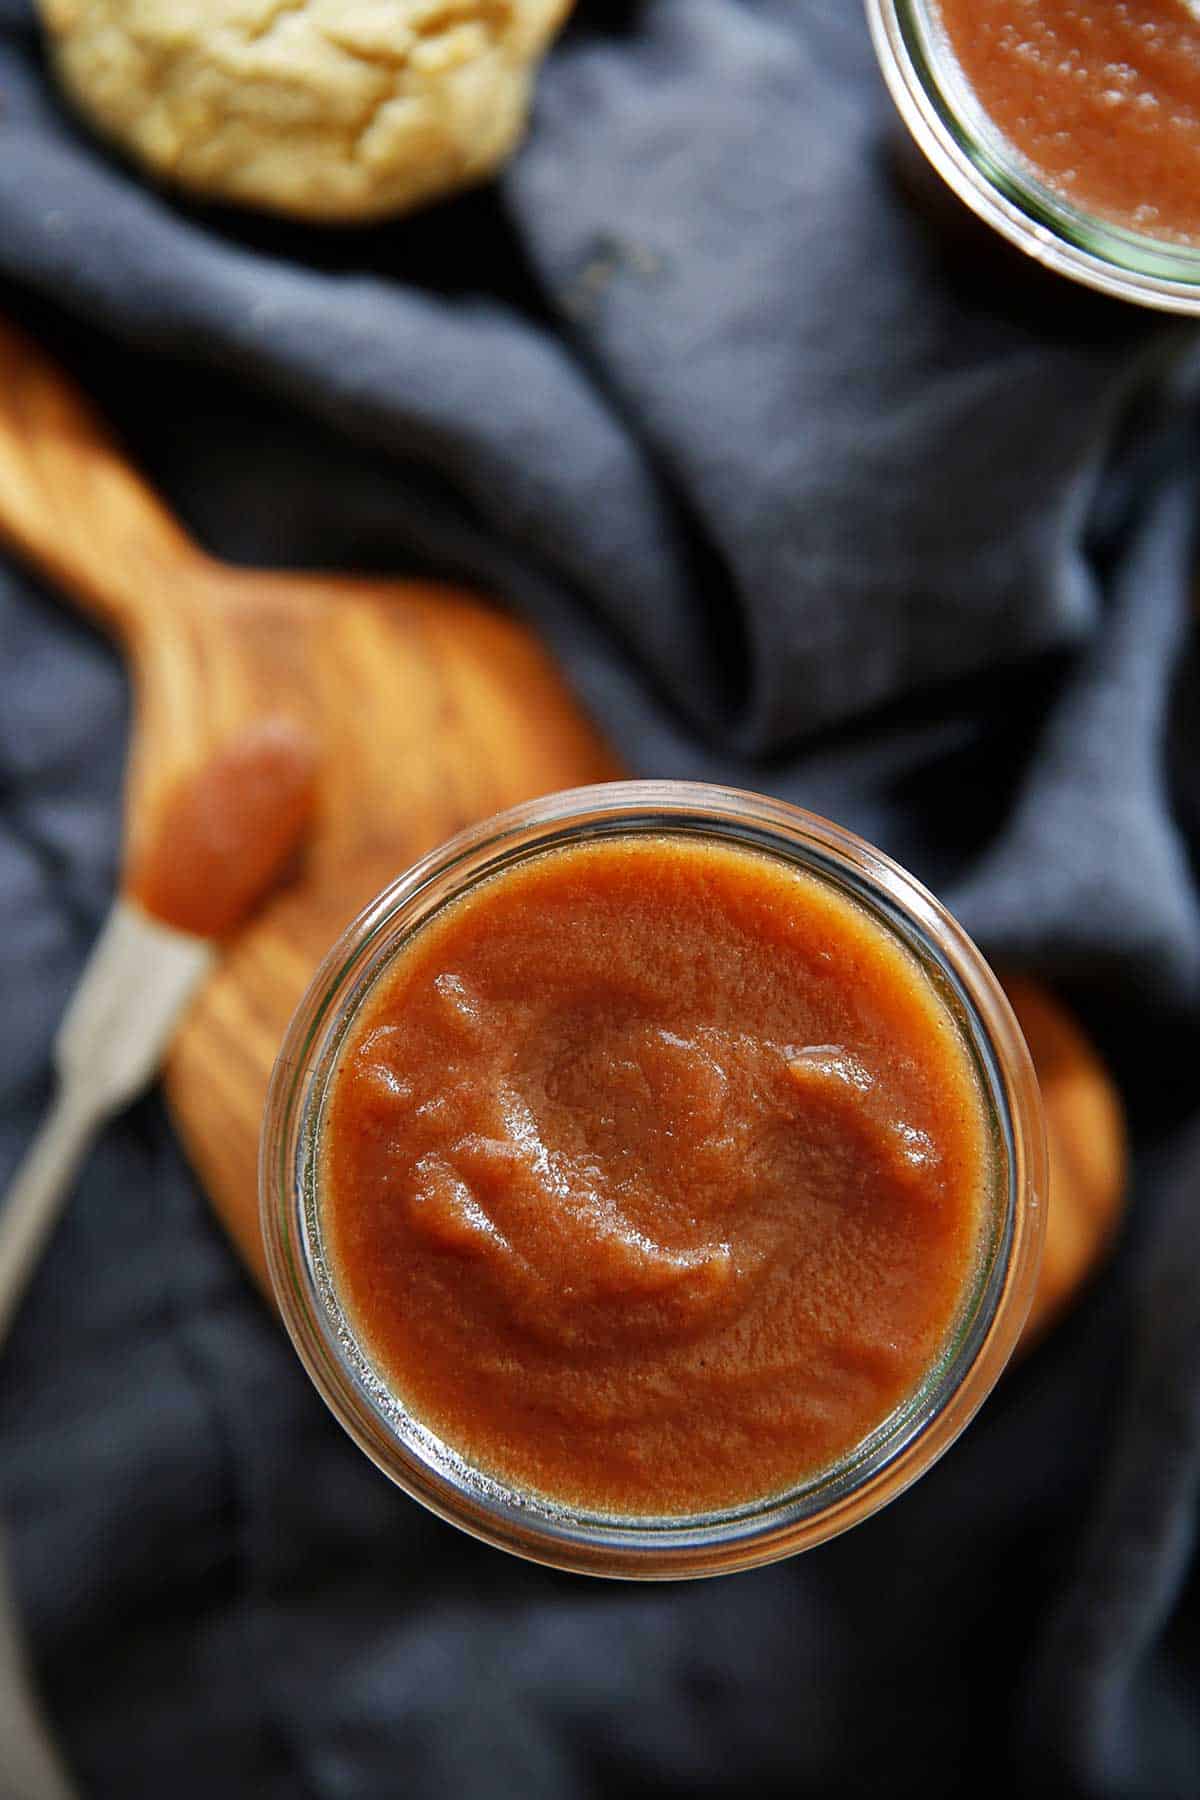 No Sugar Added Slow Cooker Apple Butter (whole30 & paleo) - Lexi's Clean Kitchen